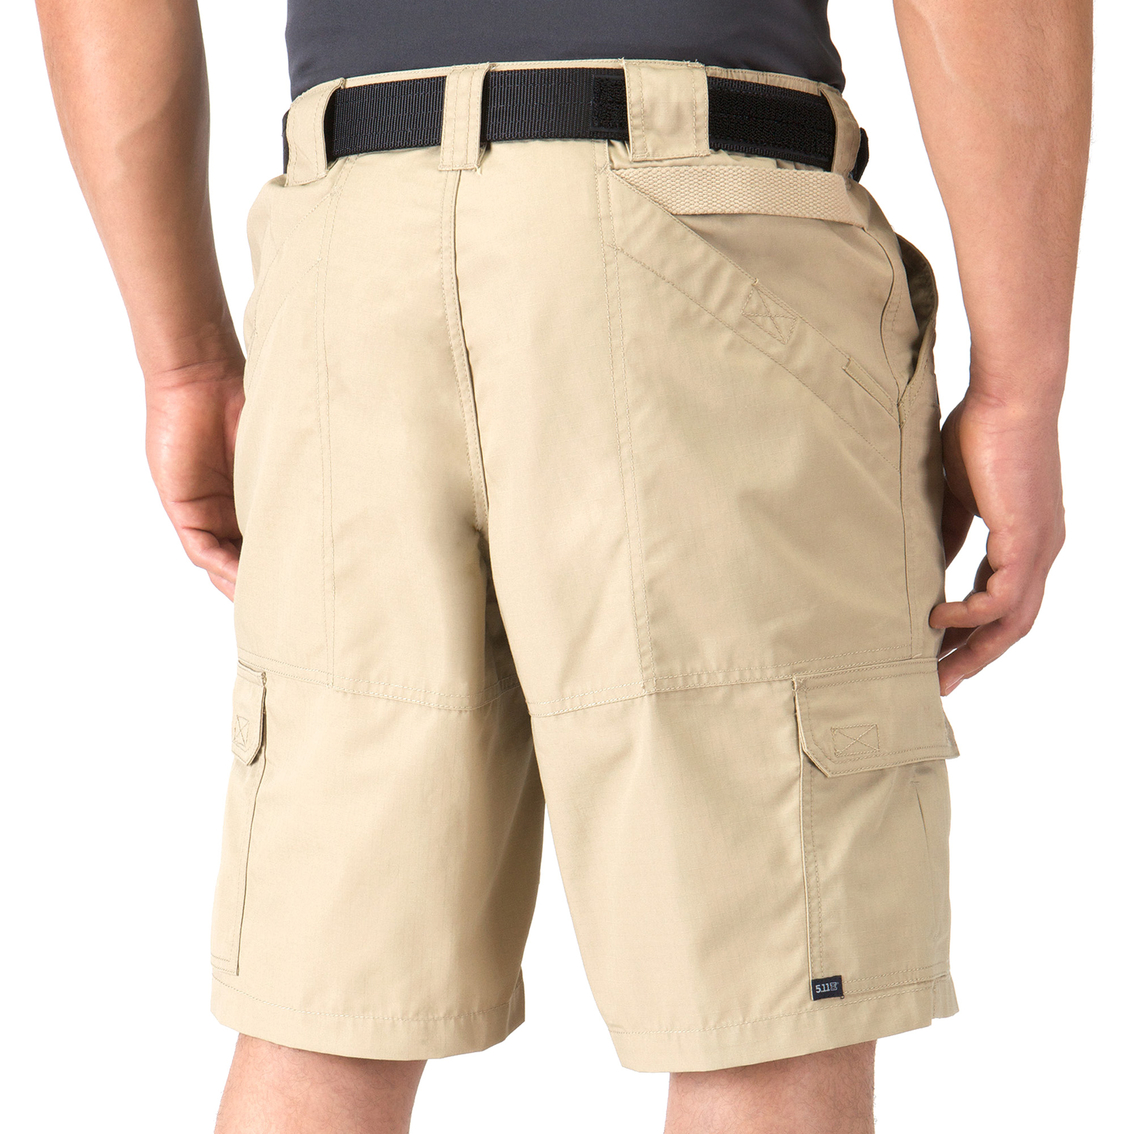 5.11 Taclite Pro 11 In. Shorts | Shorts | Clothing & Accessories | Shop ...